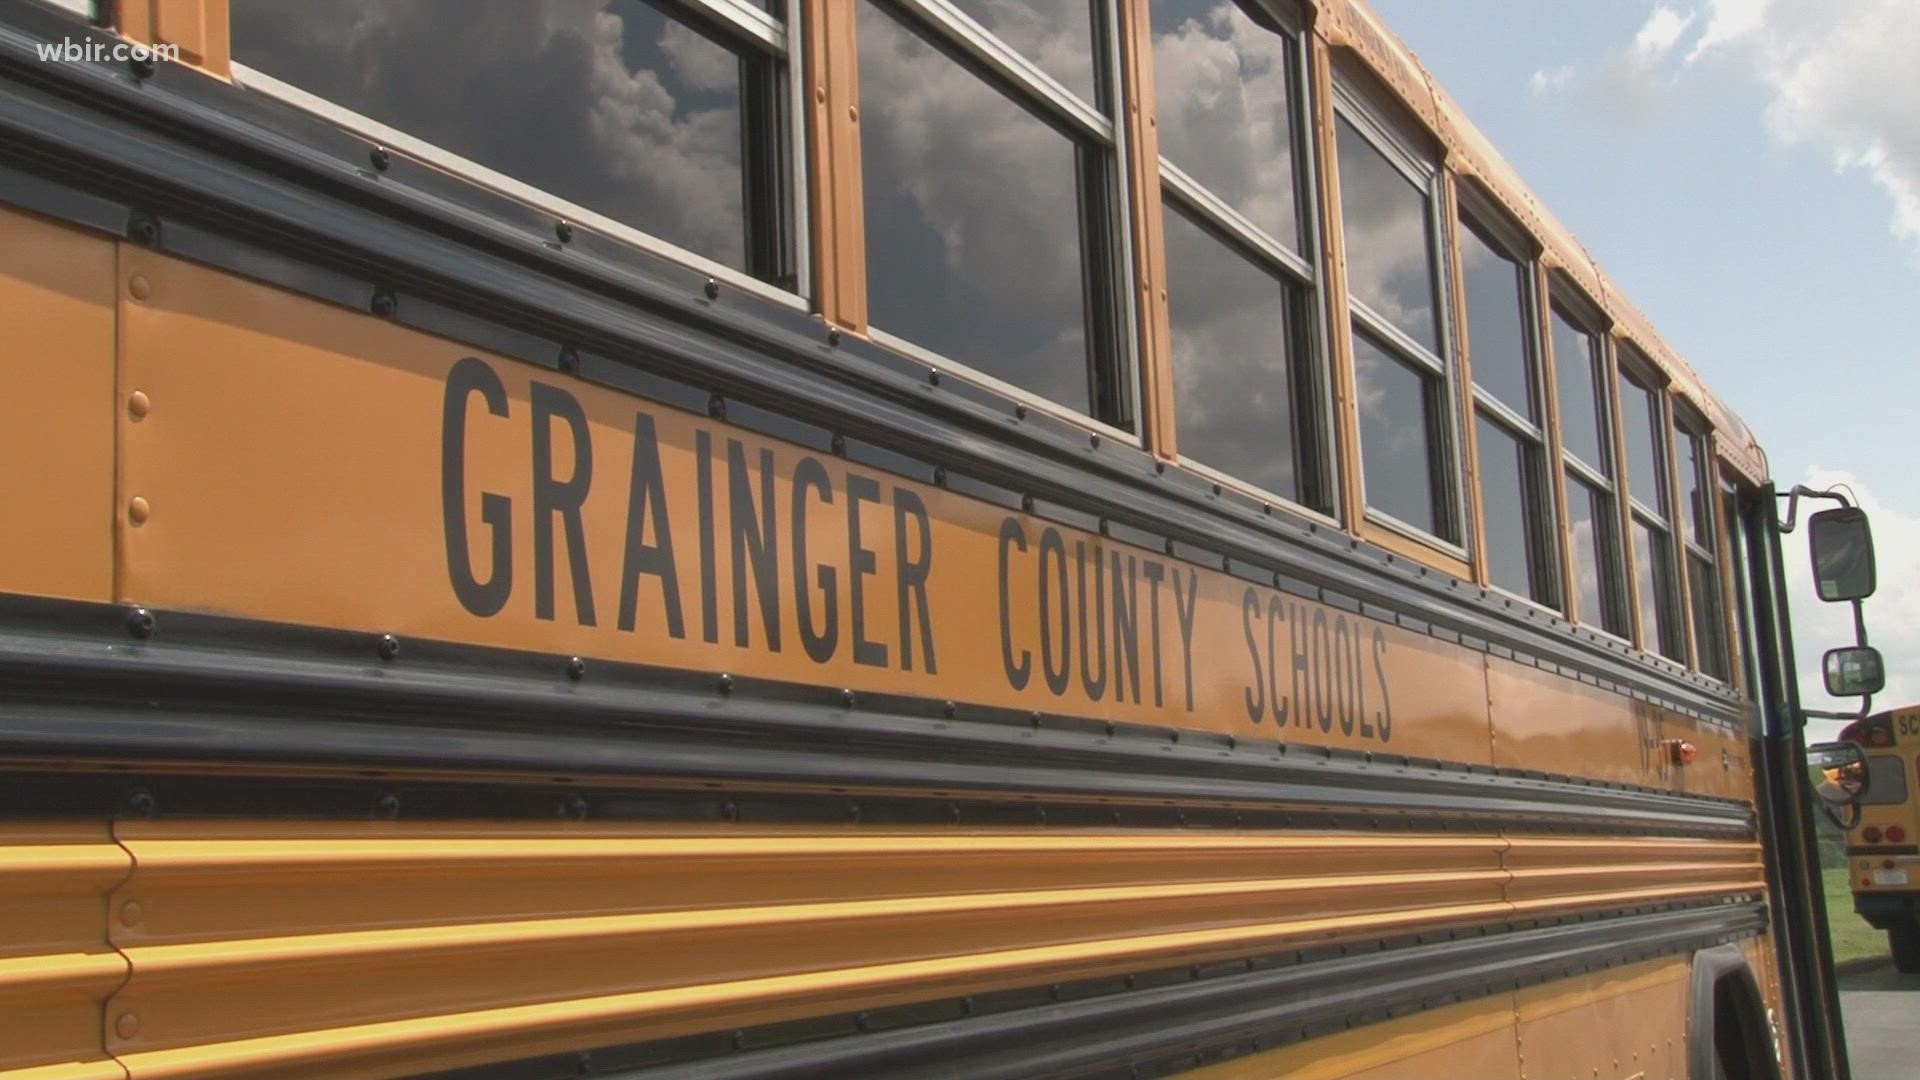 Grainger County School District reported they only have 53 bus drivers.